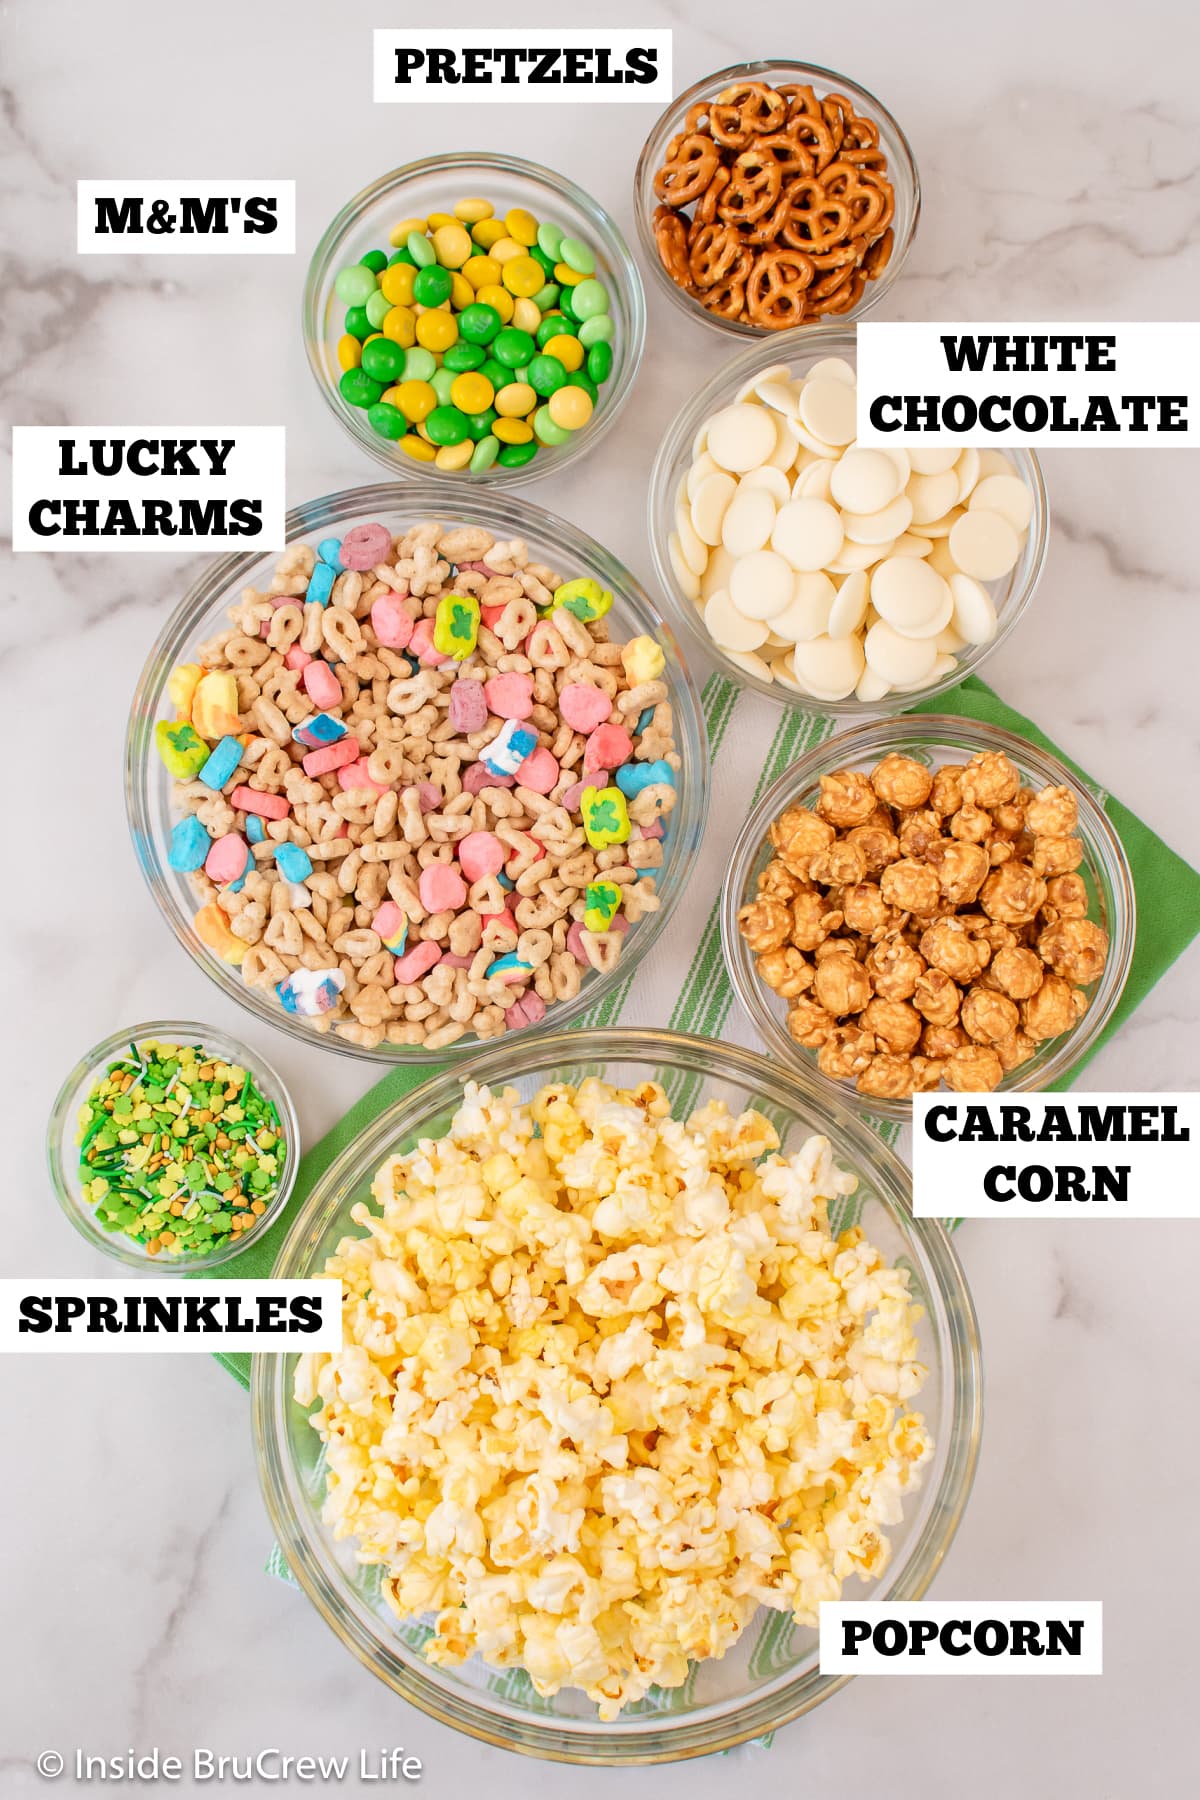 Bowls of ingredients to make chocolate covered popcorn.